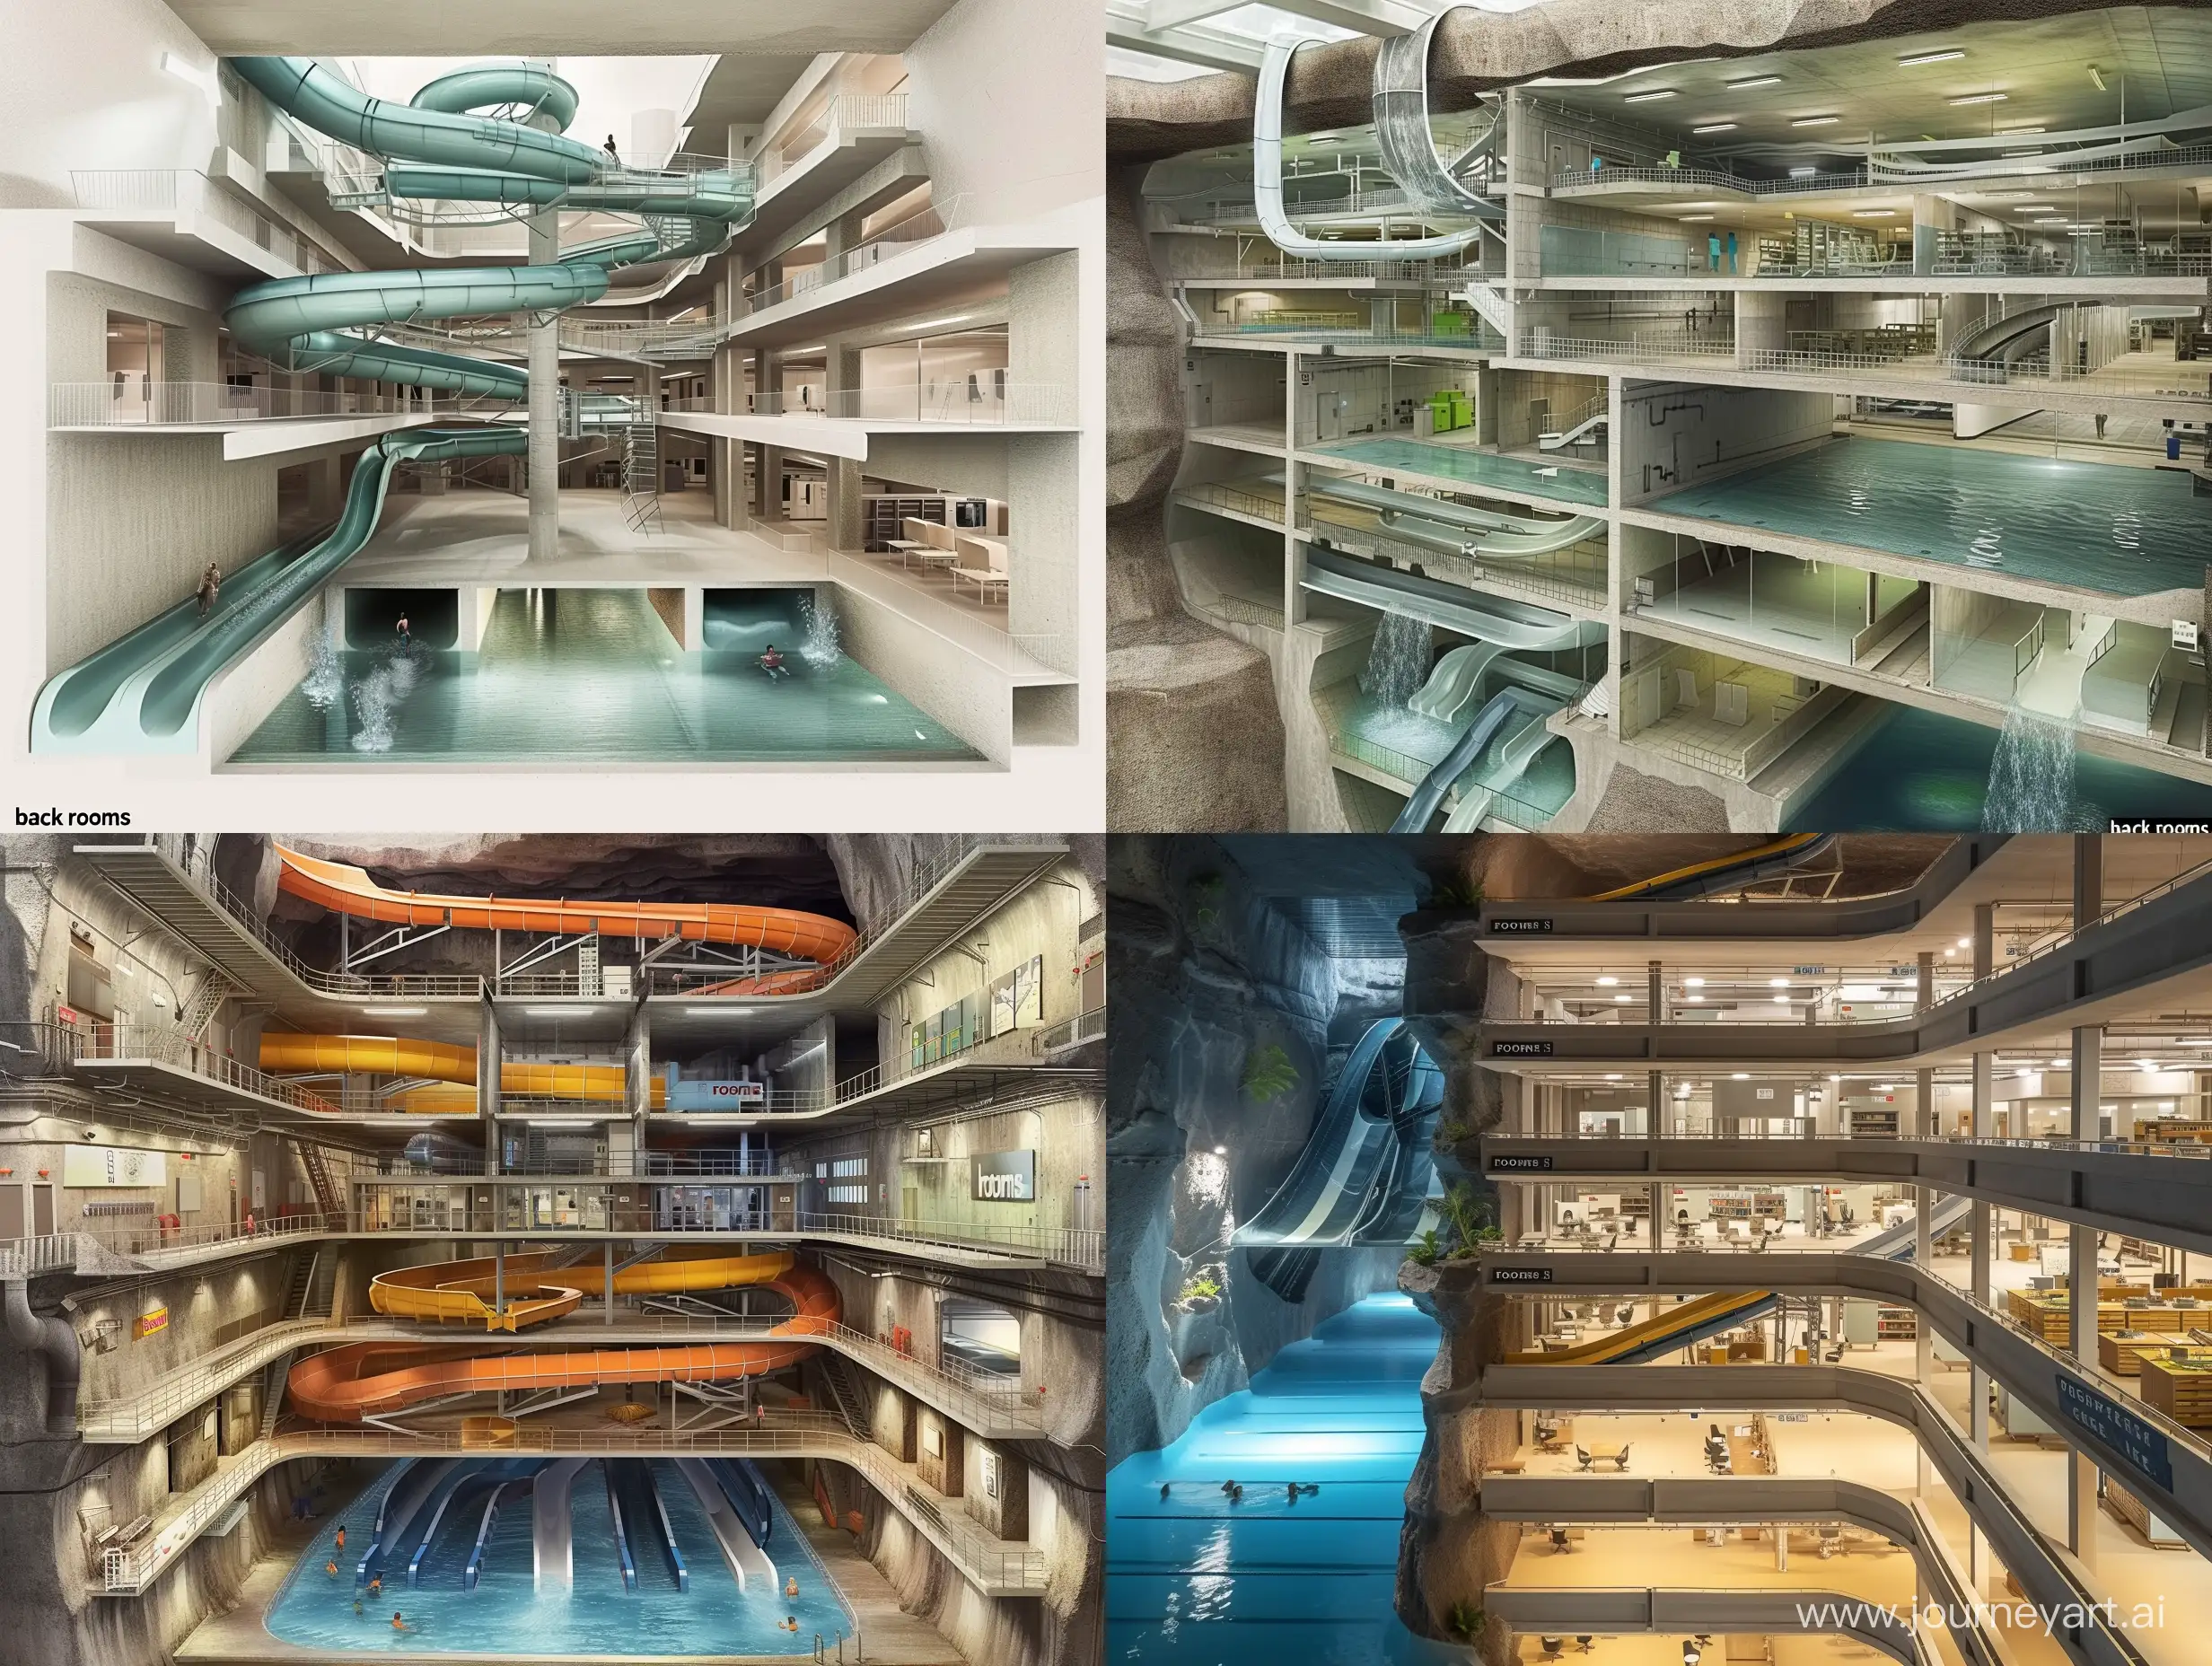 a cutaway view of a vast underground network of starkly empty offices, hallways, water slides, liminal pools, the  “back rooms”, each level is a different theme